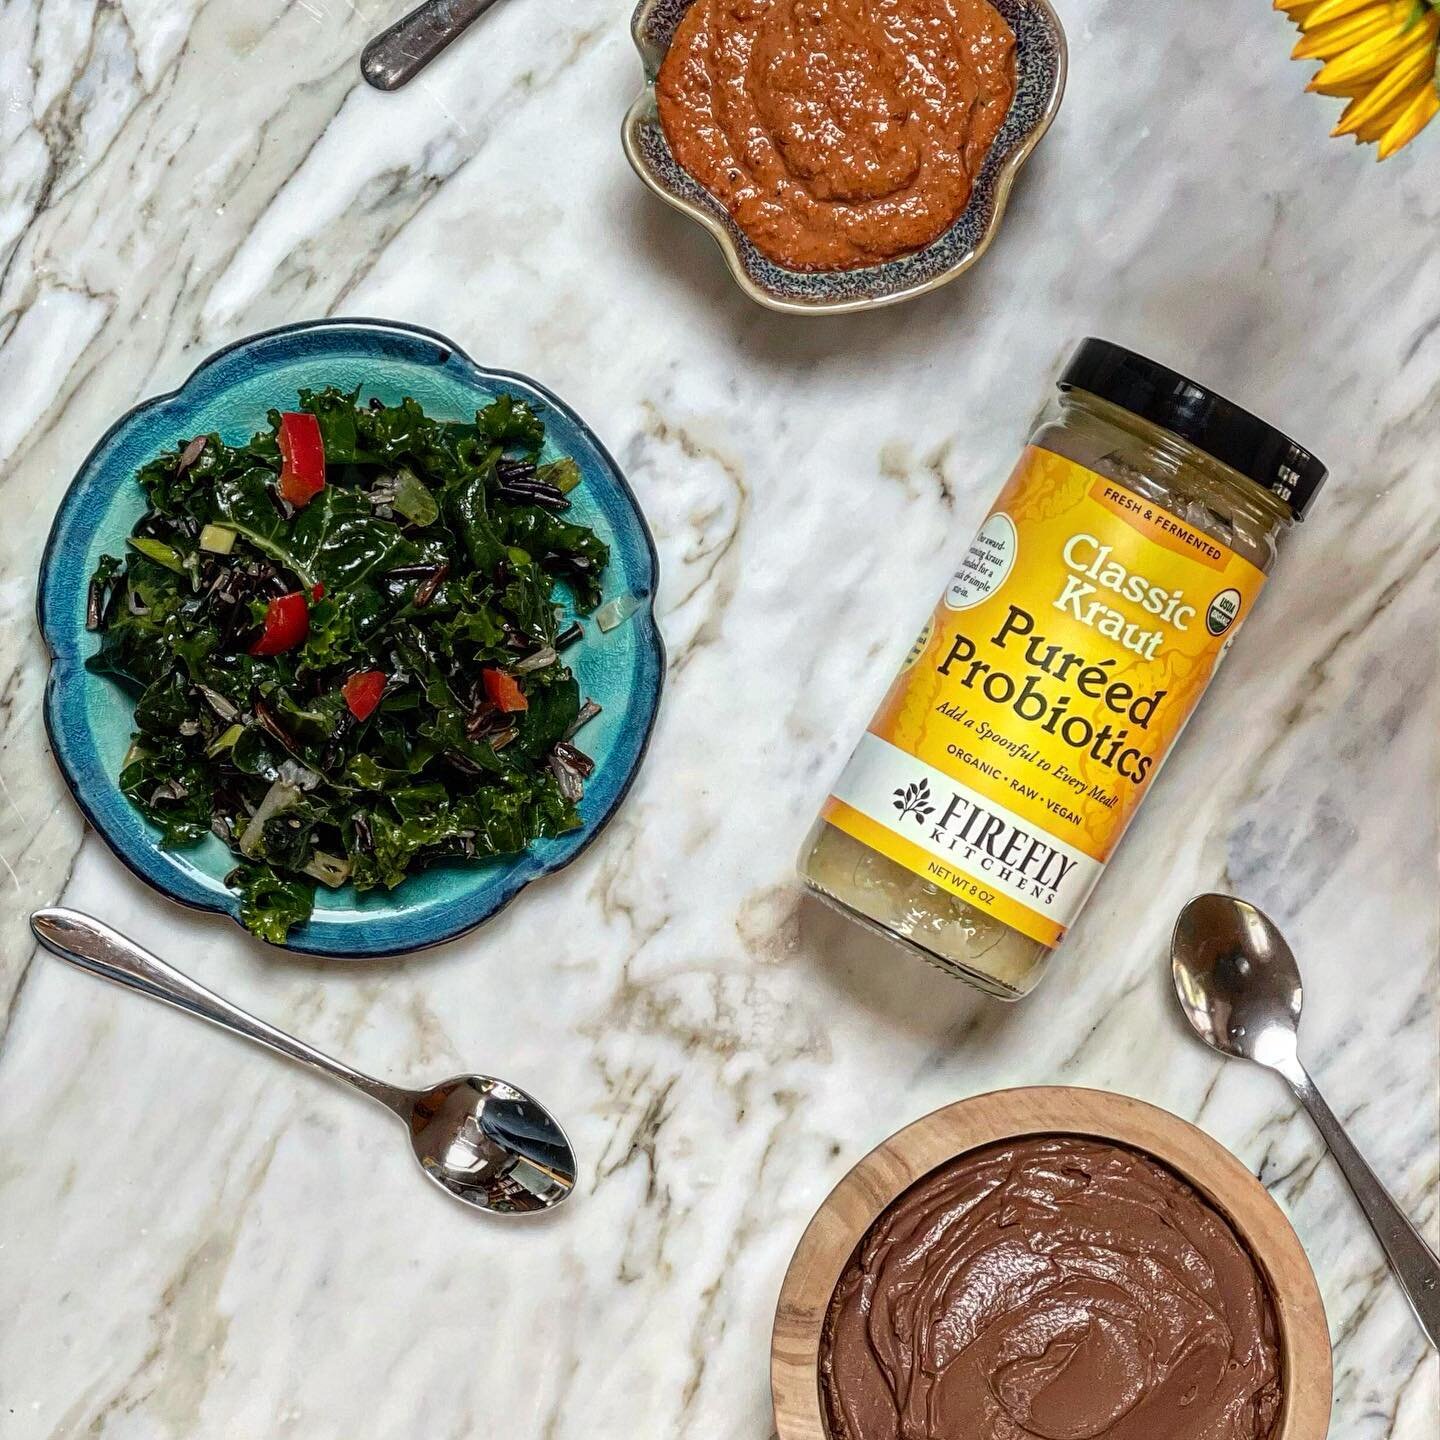 Probiotic up your meals with a tangy dollop of good bacteria. Our product of the month, pur&eacute;ed probiotics, is incredible in dips, veggies, and even chocolate pudding. Check out the recipes on our website for gut-licious ways to boost your tumm